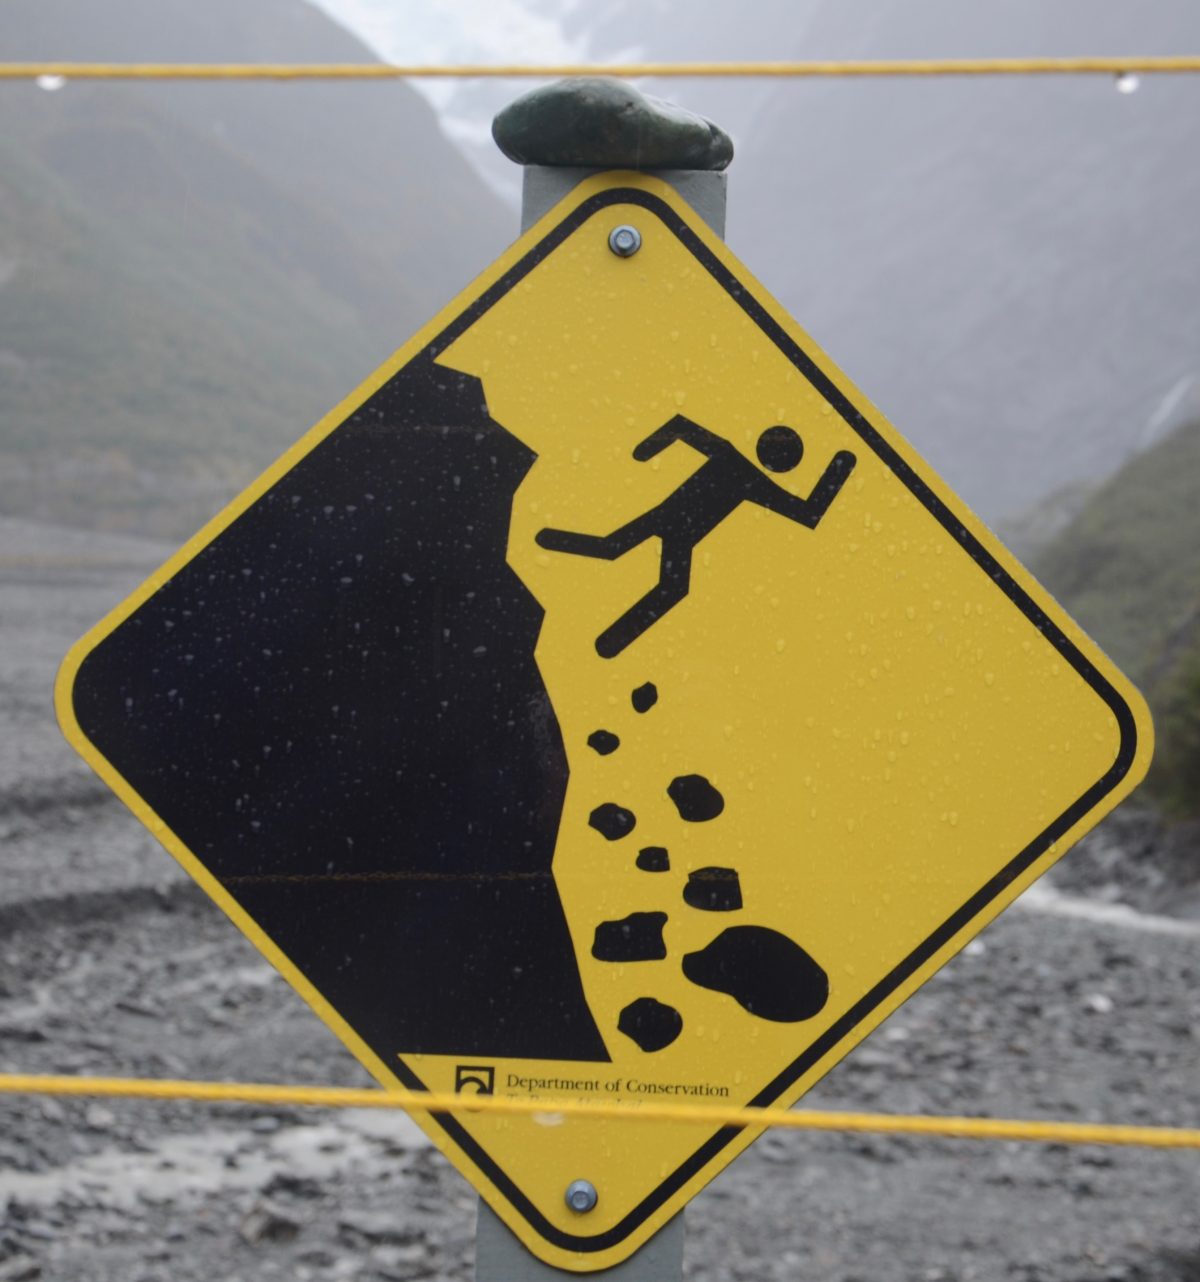 Warning sign of man chasing rocks off a cliff.